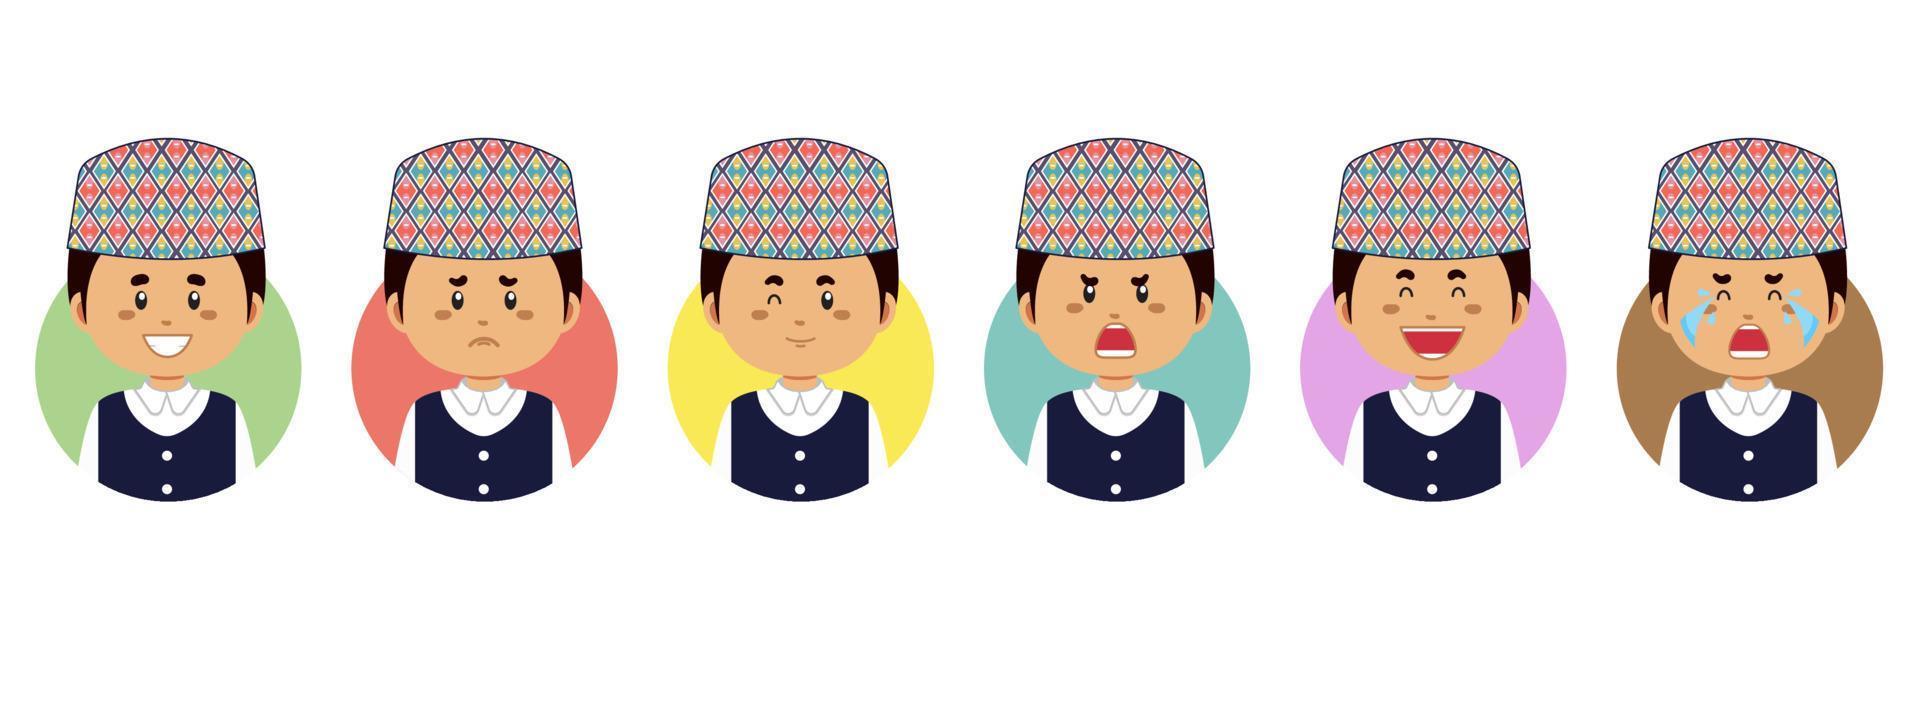 Nepal Avatar with Various Expression vector